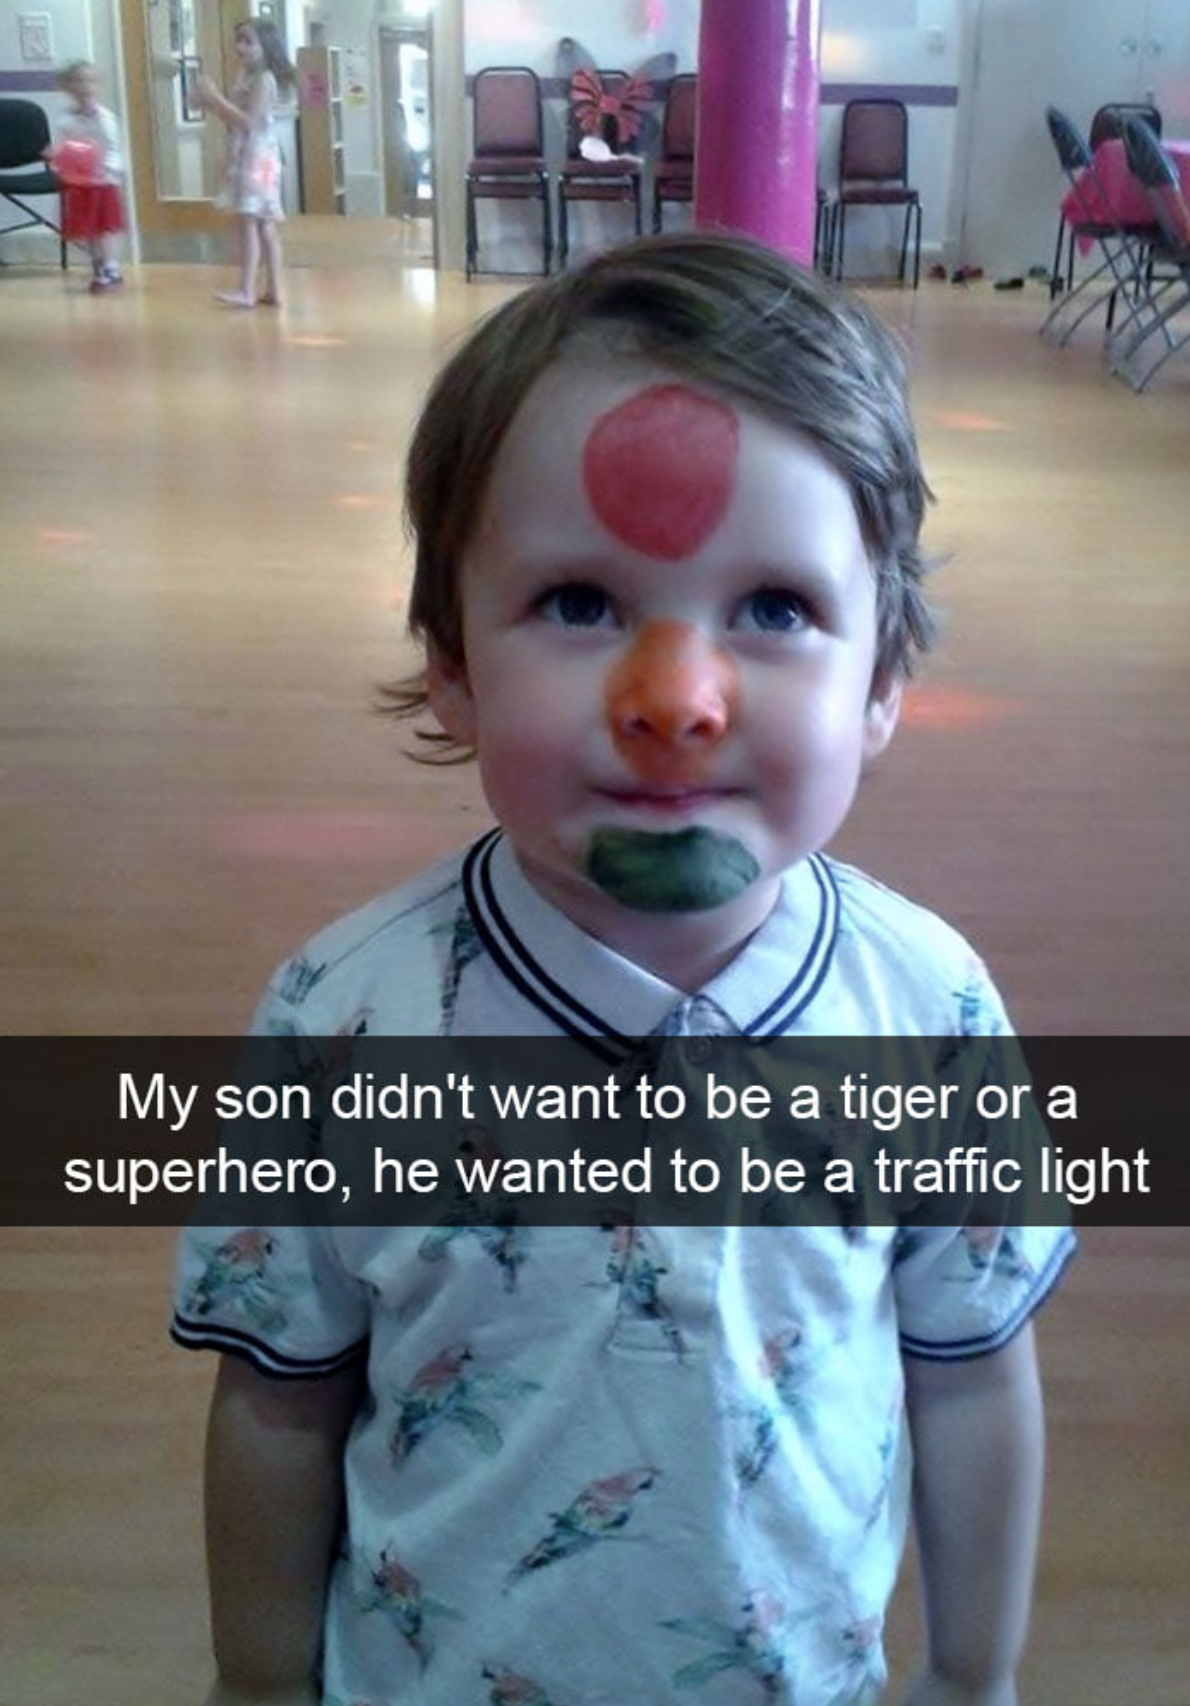 funny pictures for kids - My son didn't want to be a tiger or a superhero, he wanted to be a traffic light